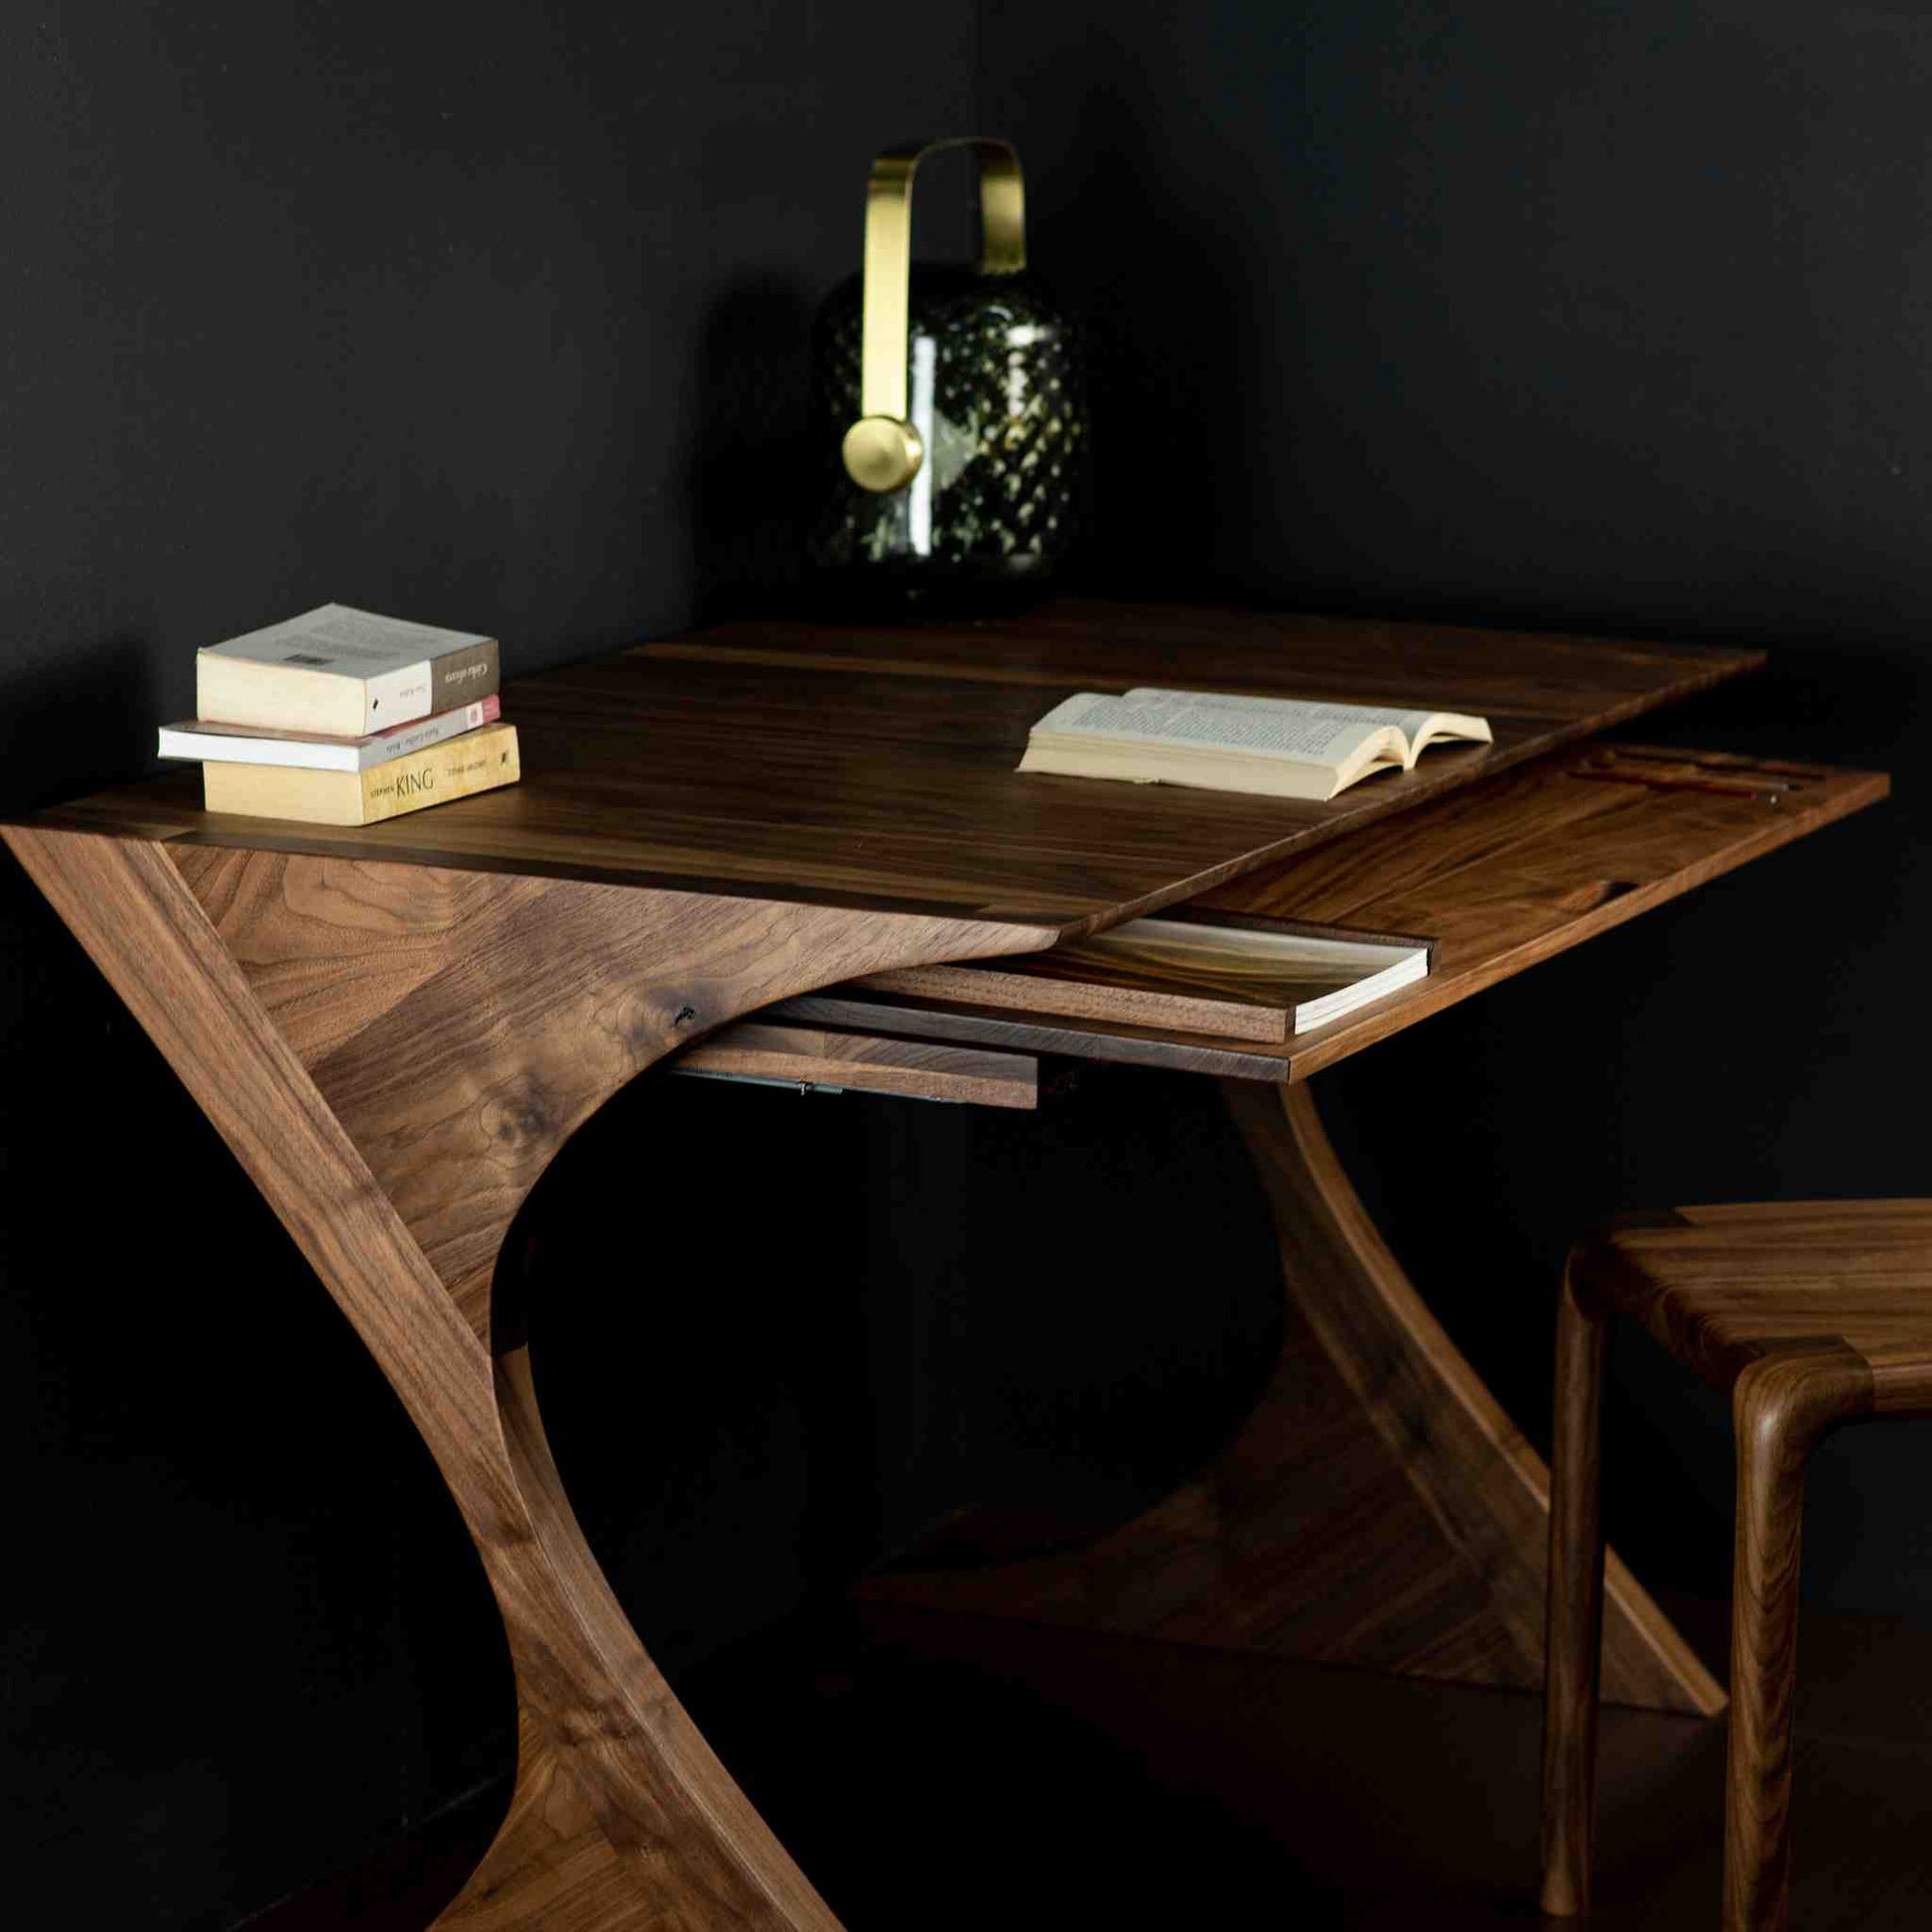 Interior arrangement with the Cervin desk with beautiful hourglass-shaped legs in solid walnut wood